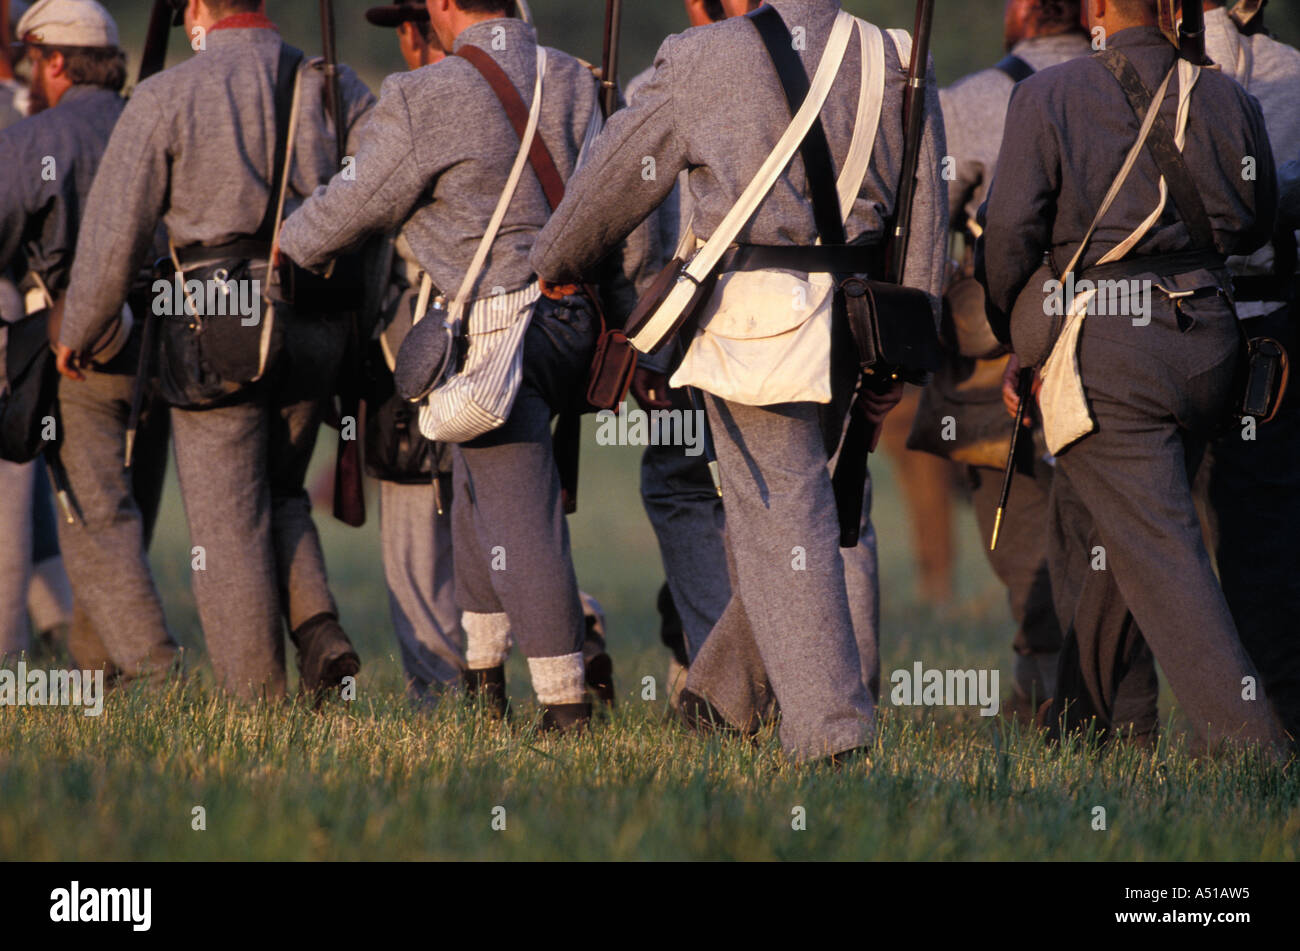 Union Army troops marching during the Battle of Gettysburg recreation Stock Photo